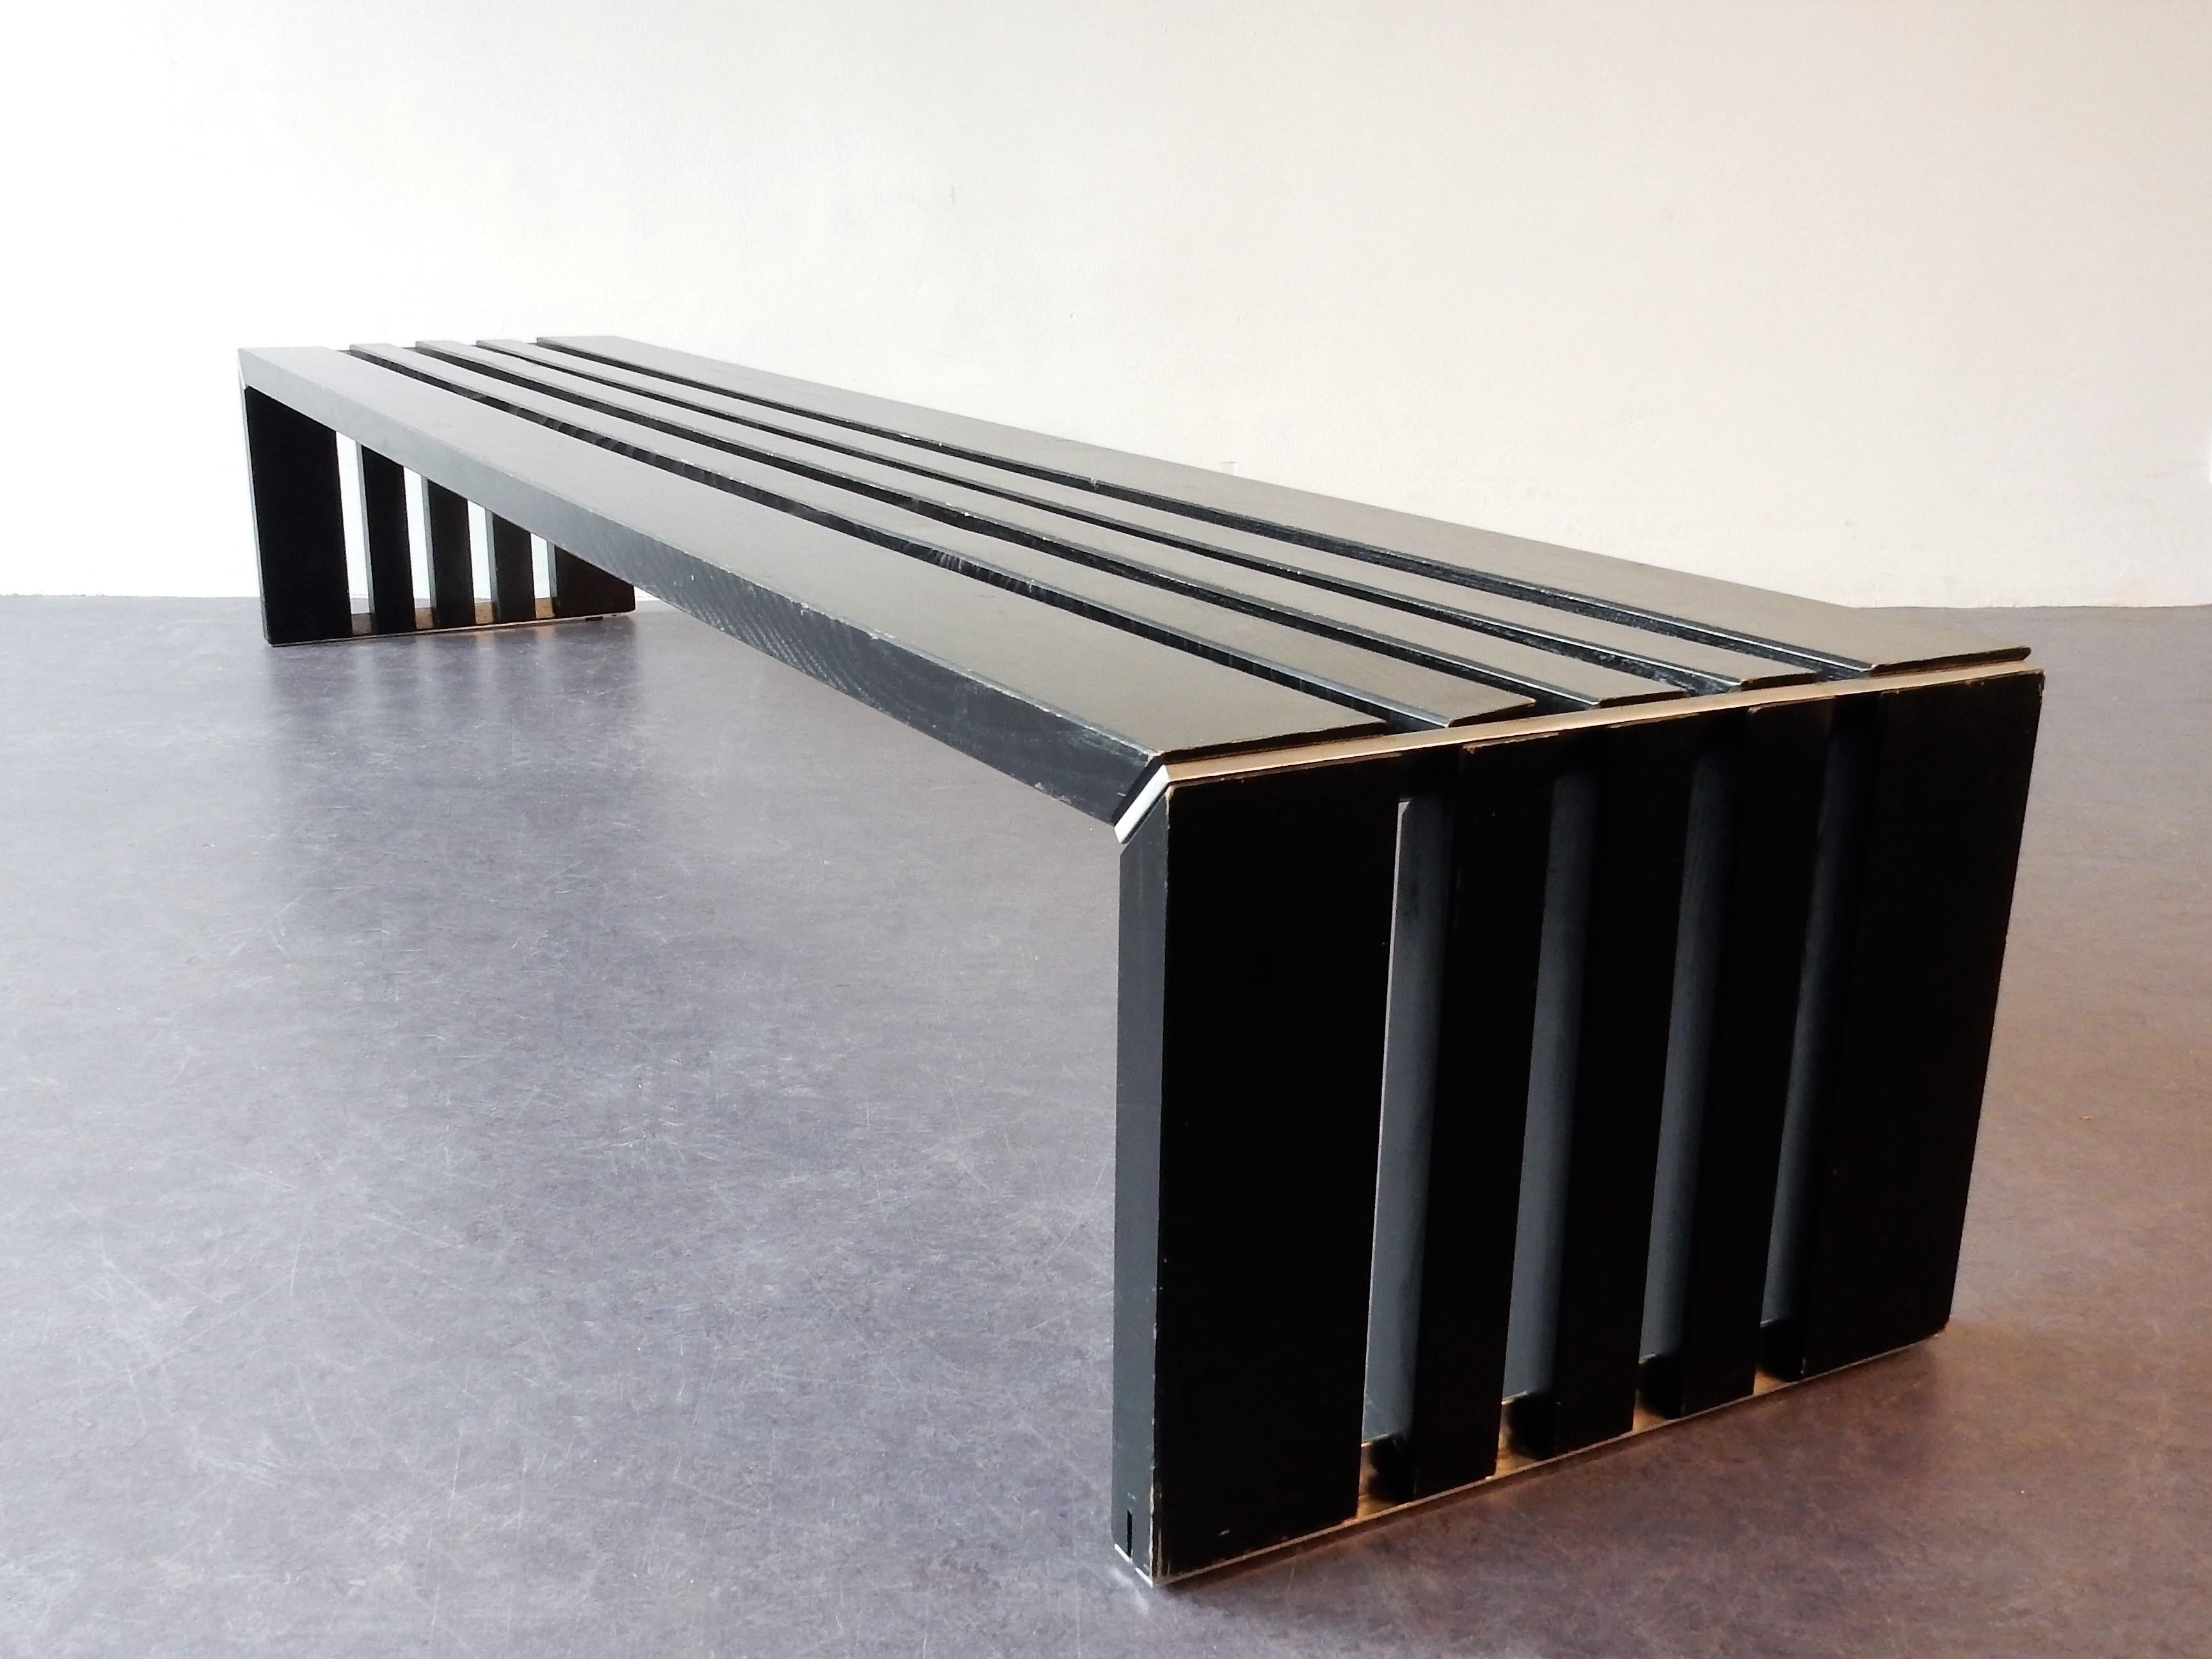 Late 20th Century 'Passe Par Tout' Slatted Bench by Walter Antonis for Arspect, The Netherlands